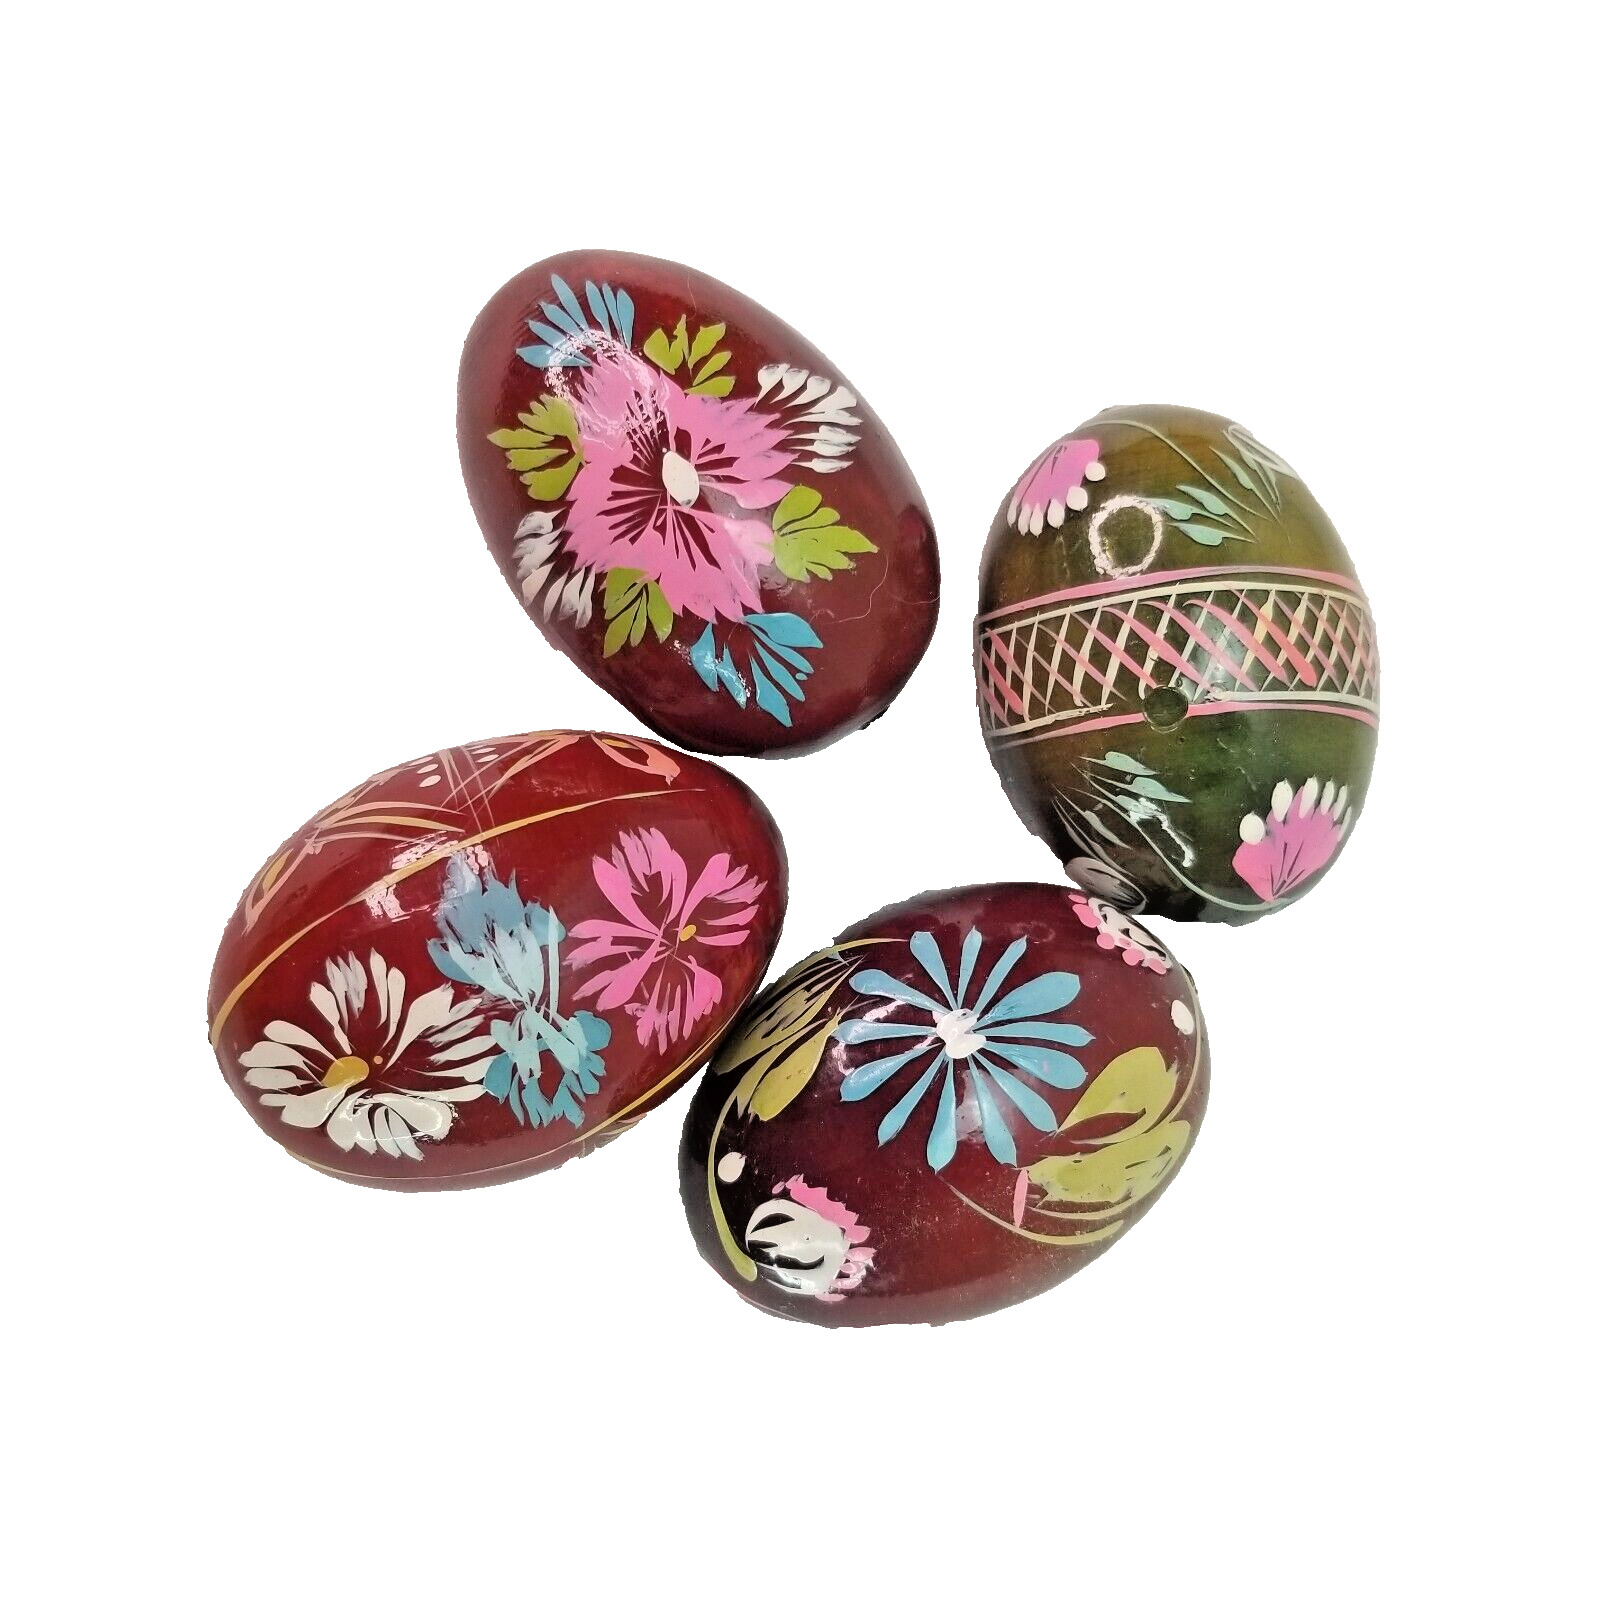 Vintage Hand Painted Wood Easter Eggs LOT OF 4 pink blue white green flowers